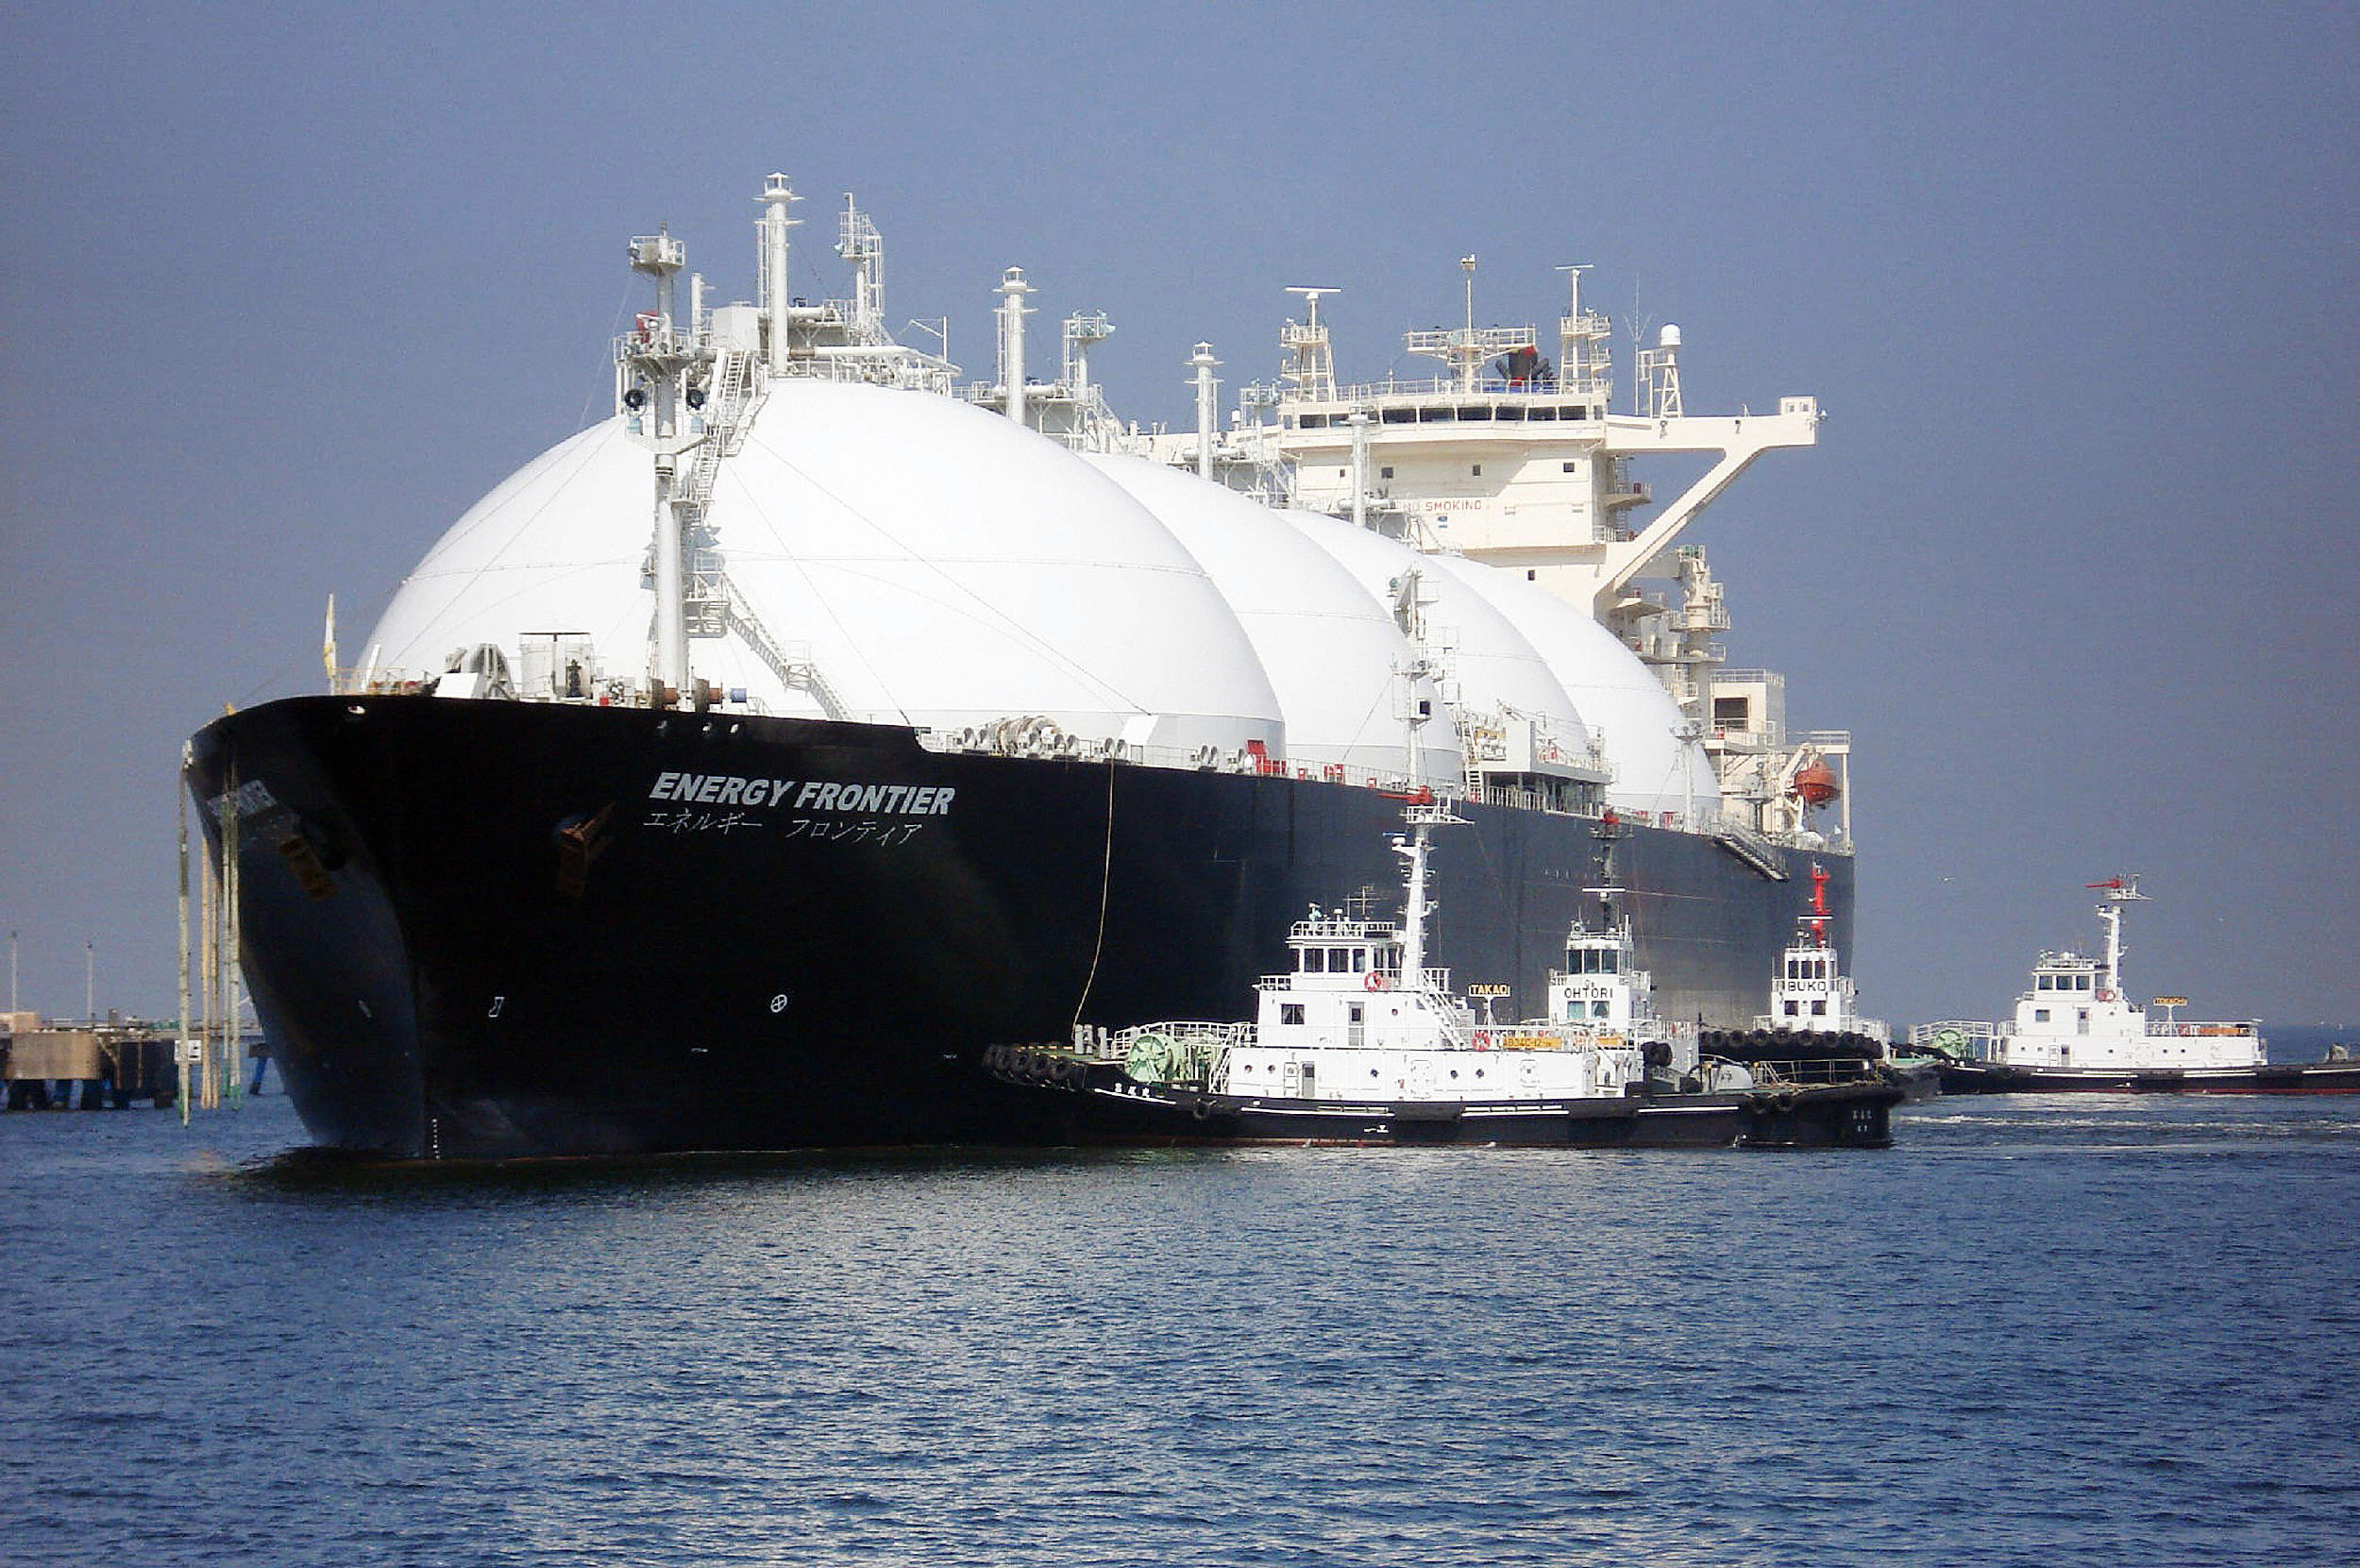 A liquefied natural gas (LNG) tanker arrives at a gas storage station at Sodegaura city in Chiba prefecture, east of Tokyo on April 6, 2009 for the first shipment of LNG from Sakhalin-2 natural gas development project in Sakhalin, Russia.  AFP PHOTO / JIJI PRESS (Photo credit should read STR/AFP/Getty Images)